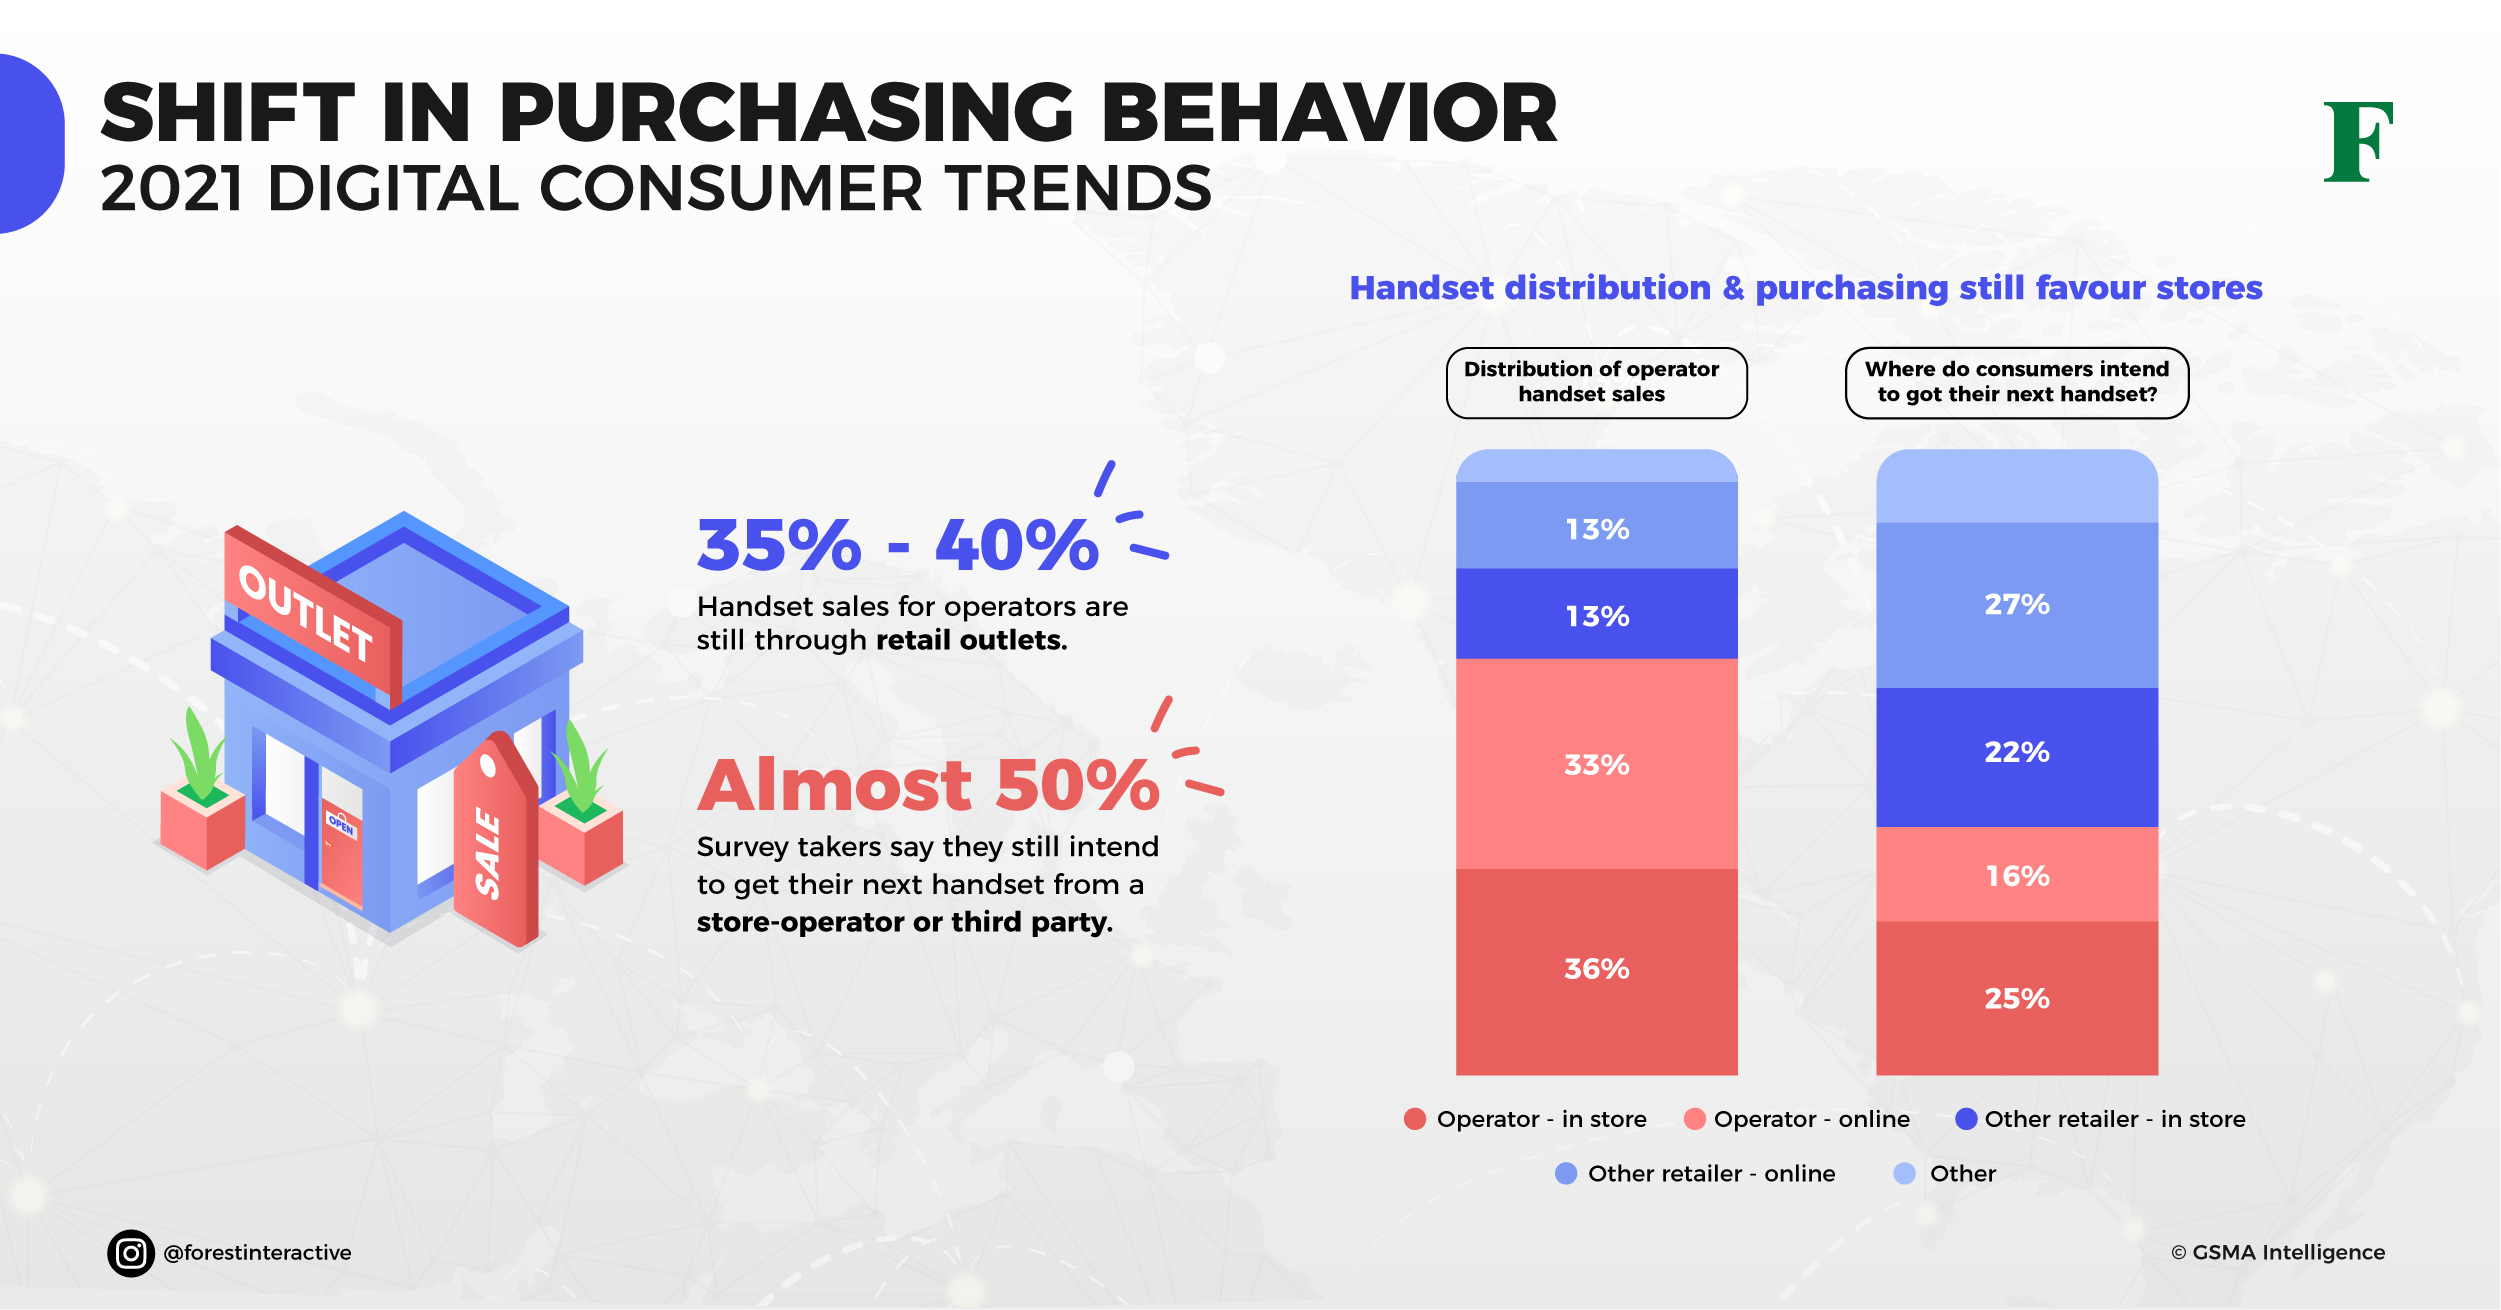 consumers adjust their purchasing behavior so that